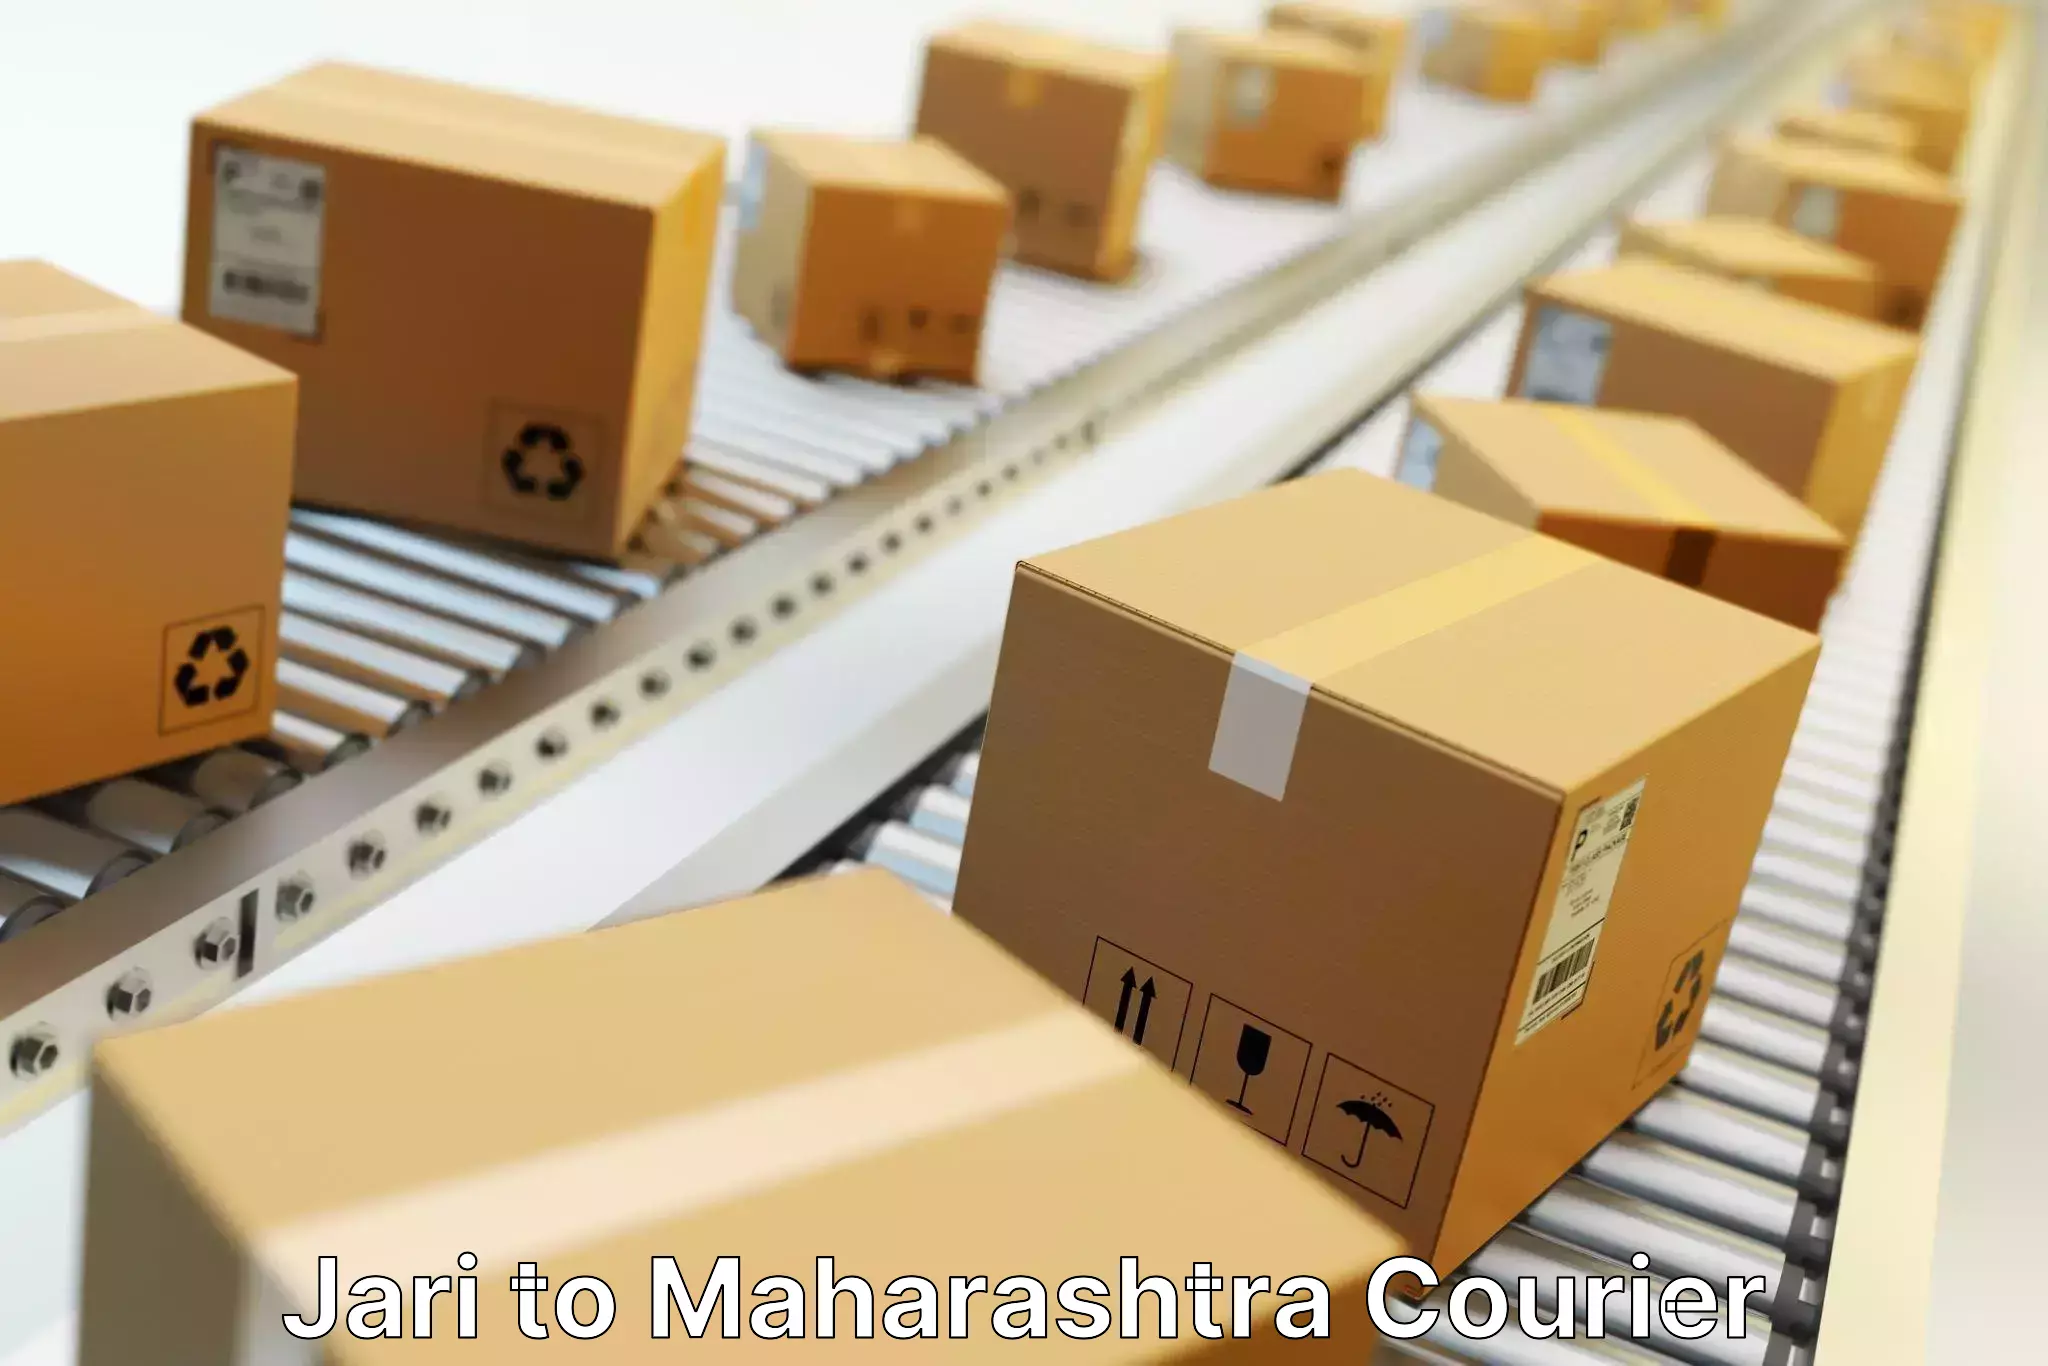 Customer-oriented courier services Jari to Maharashtra